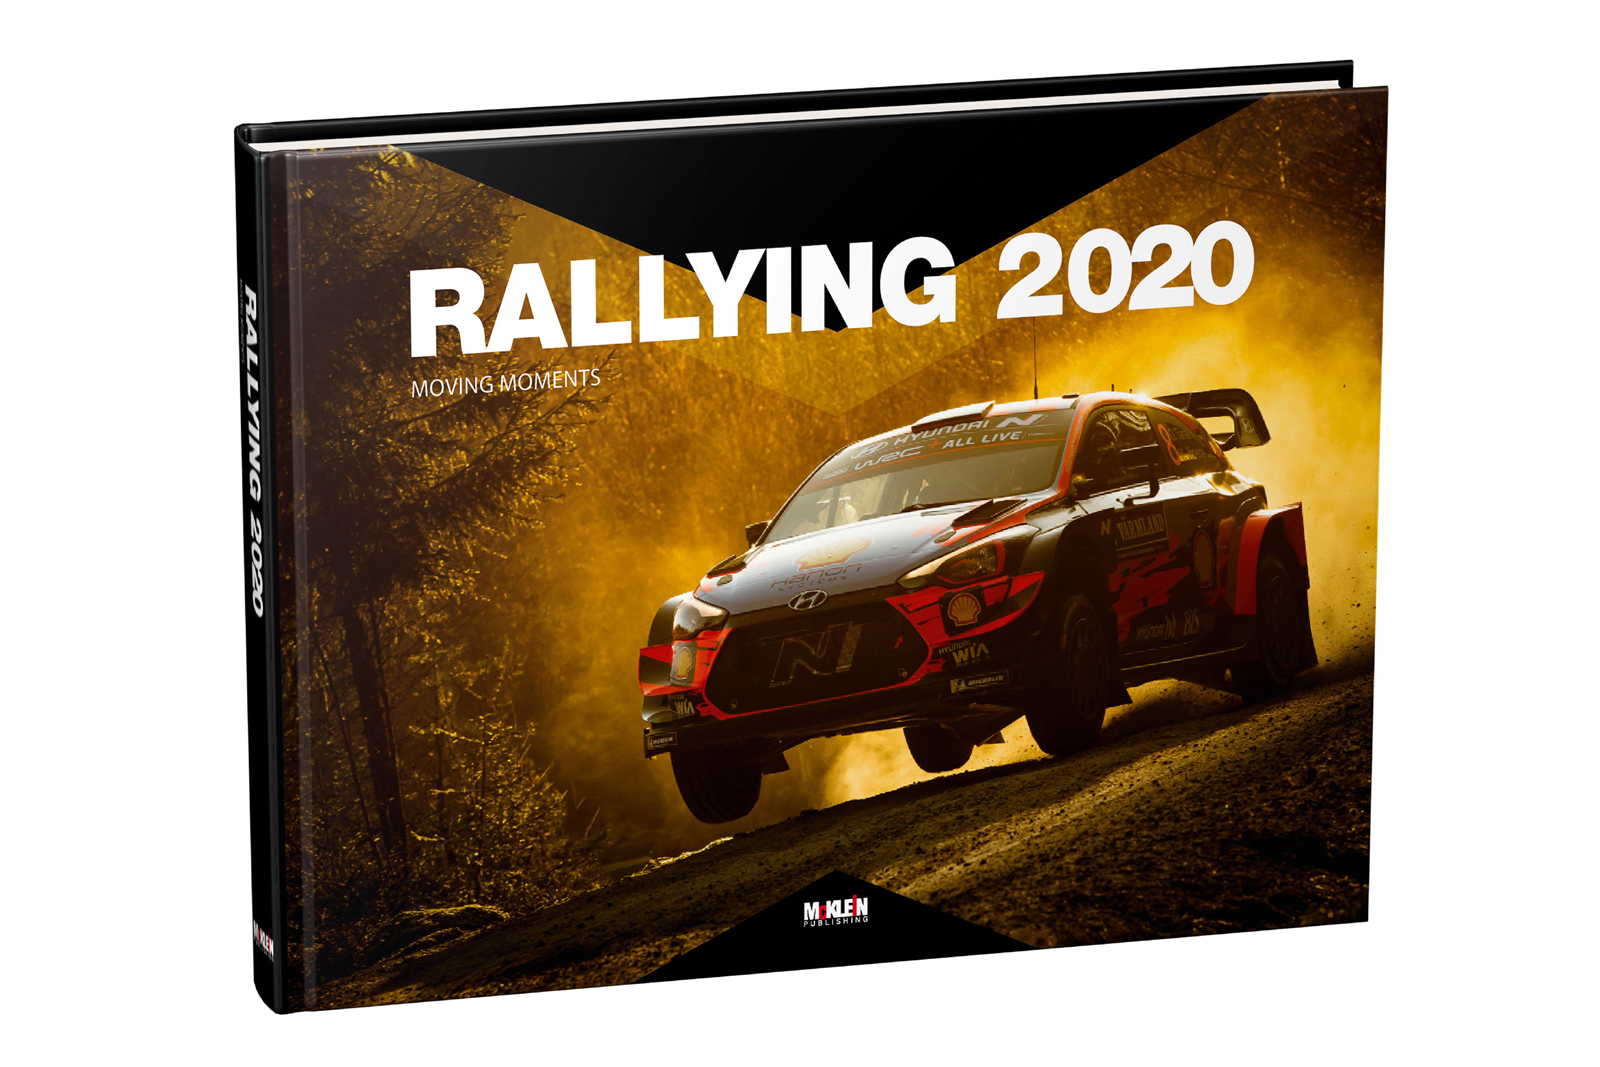 Rallying 2020 - Moving Moments